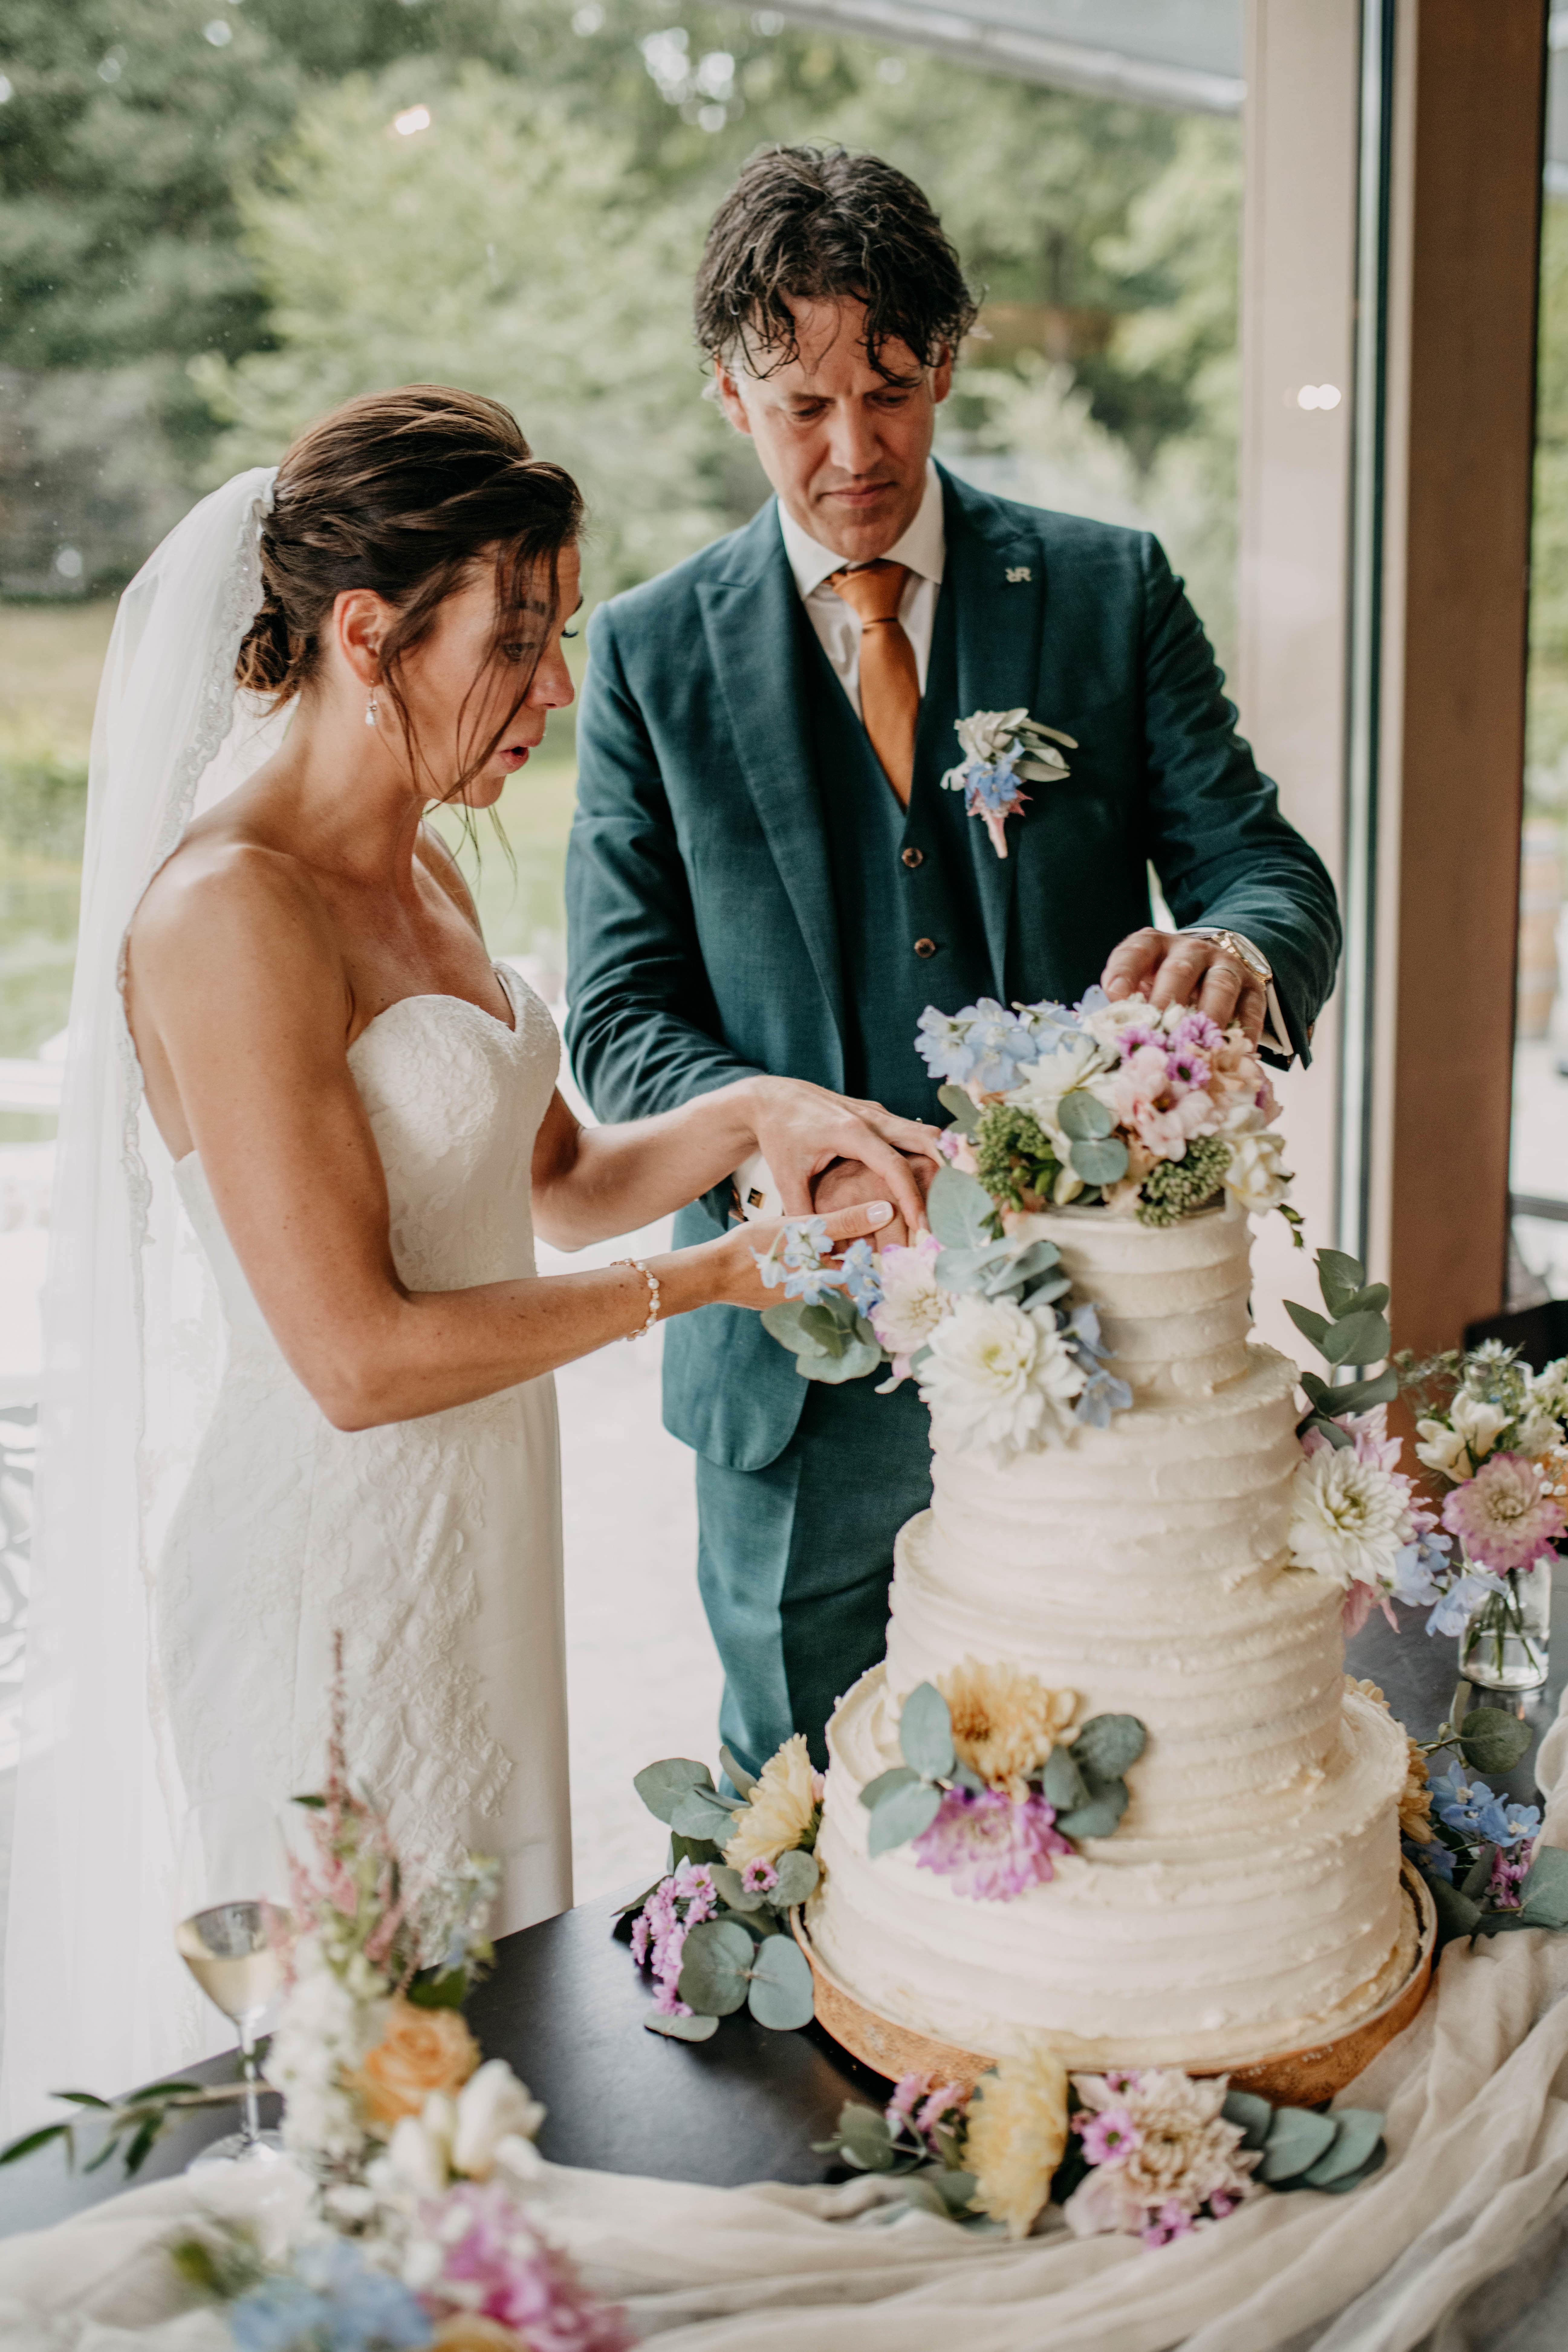 Italian rustic wedding in the South of the Netherlands at Winselerhof